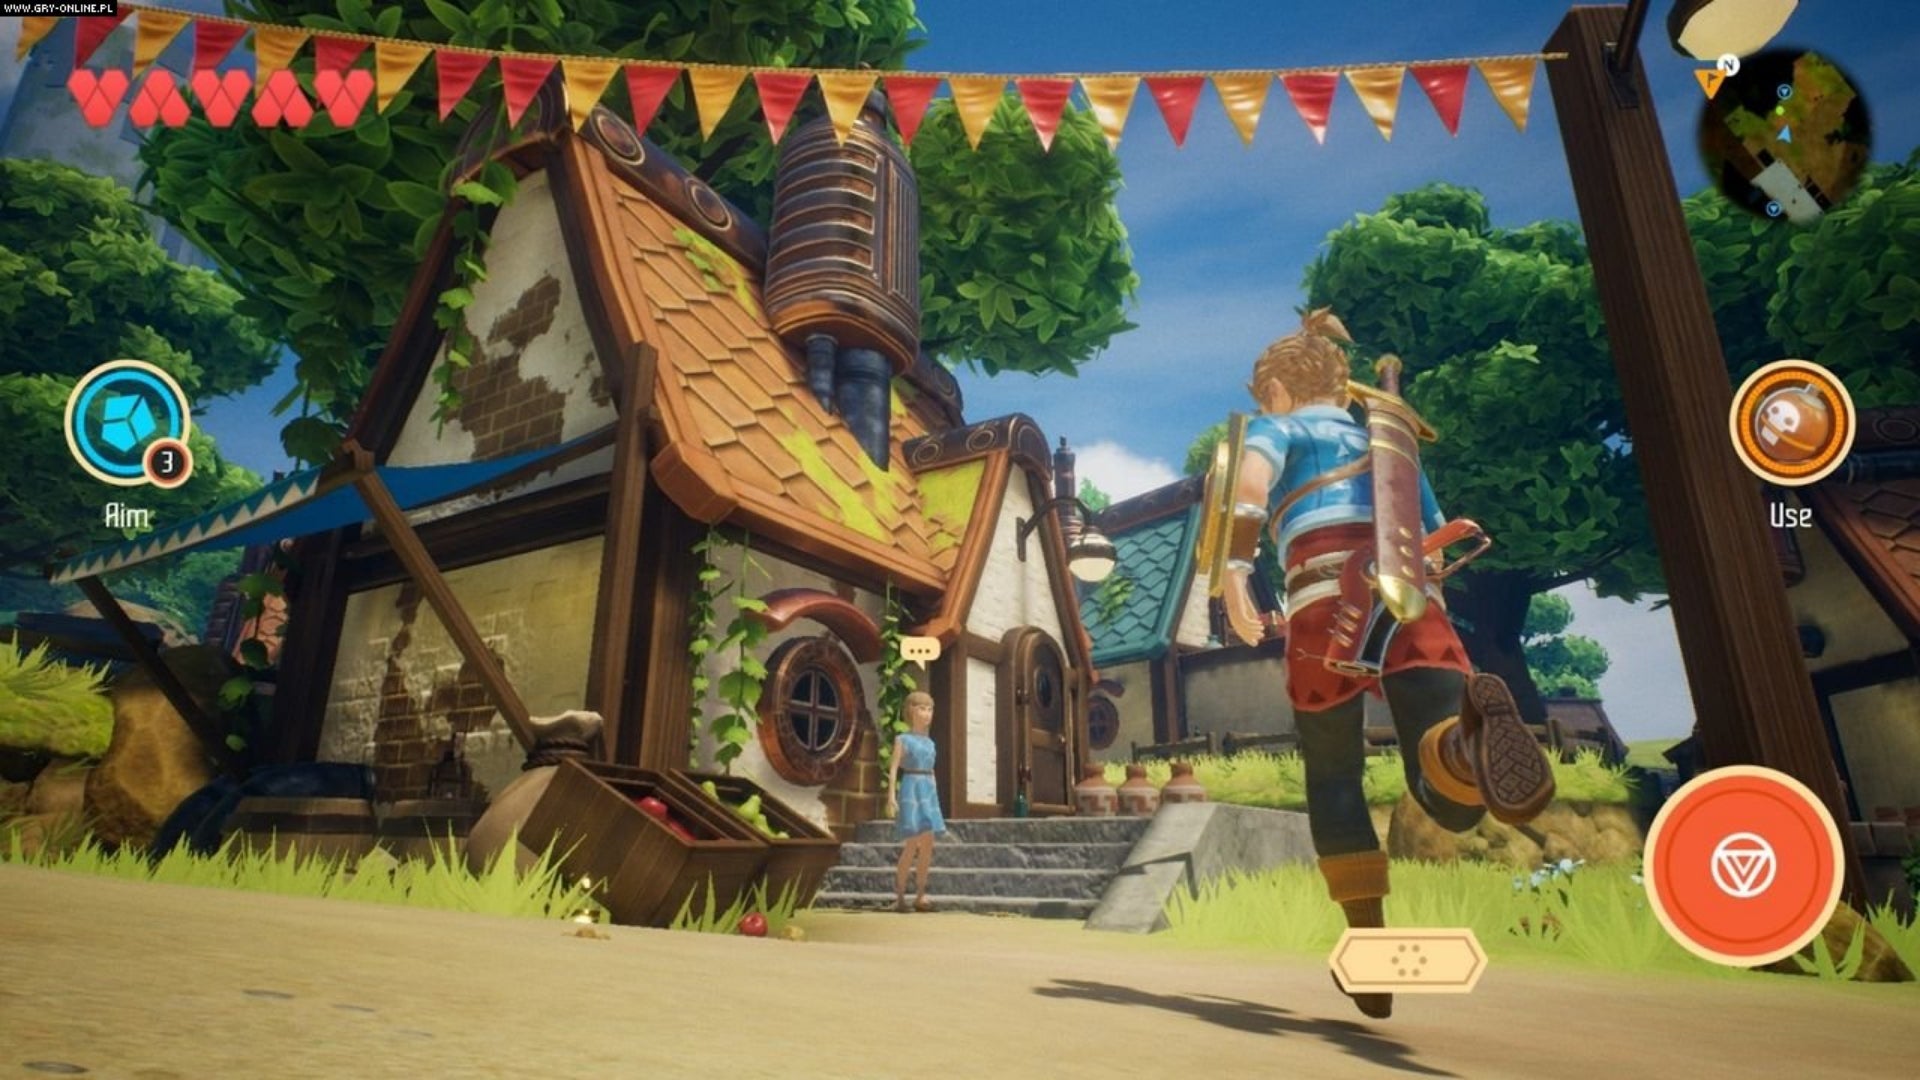 The player enters a village in Oceanhorn 2